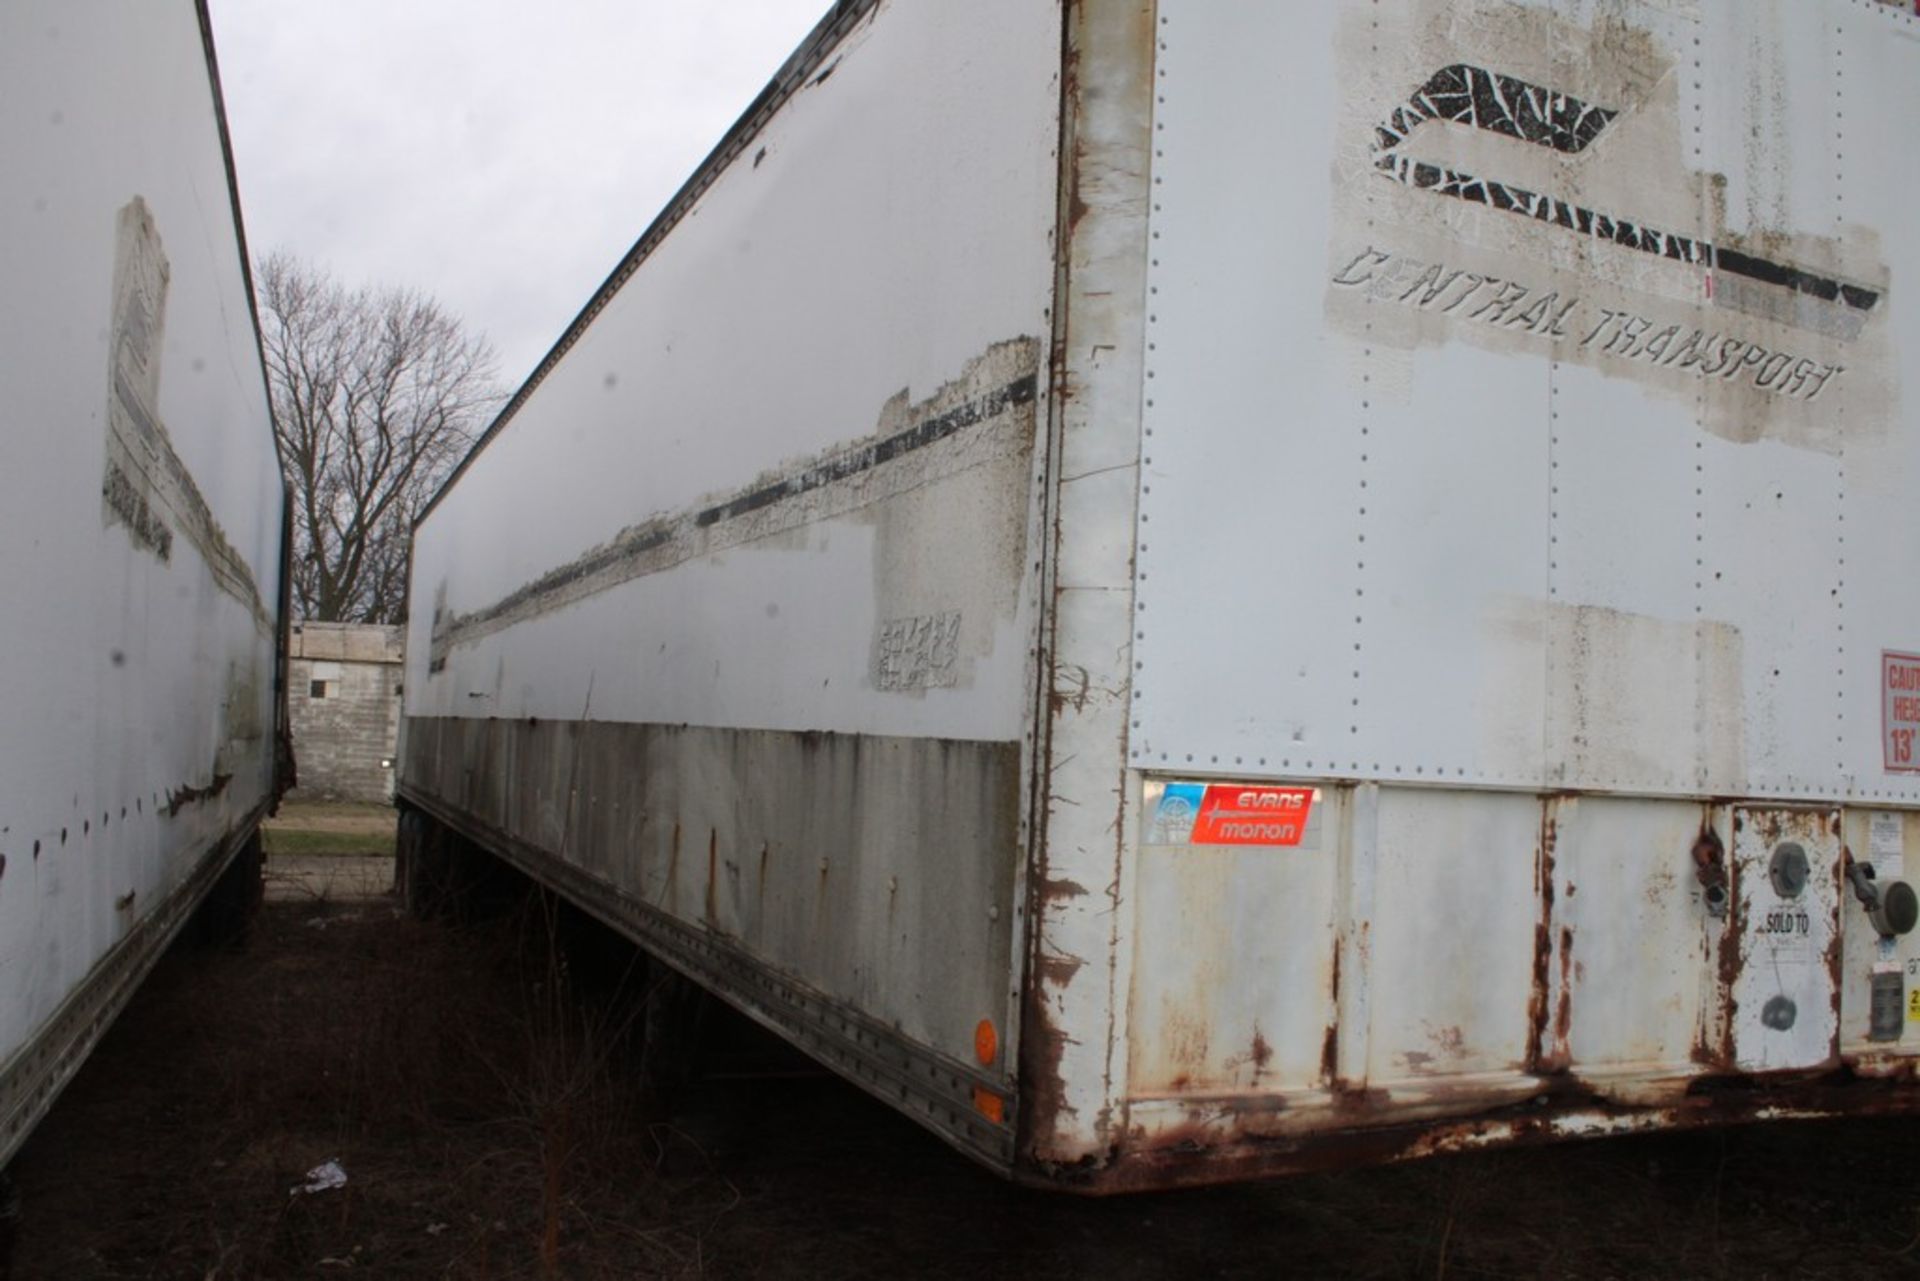 MONON APPROX. 45’ MODEL FA80W ENCLOSED DRY VAN TRAILERS, VIN: 1NNVF482EM081093 (NEW 1984) - Image 4 of 6